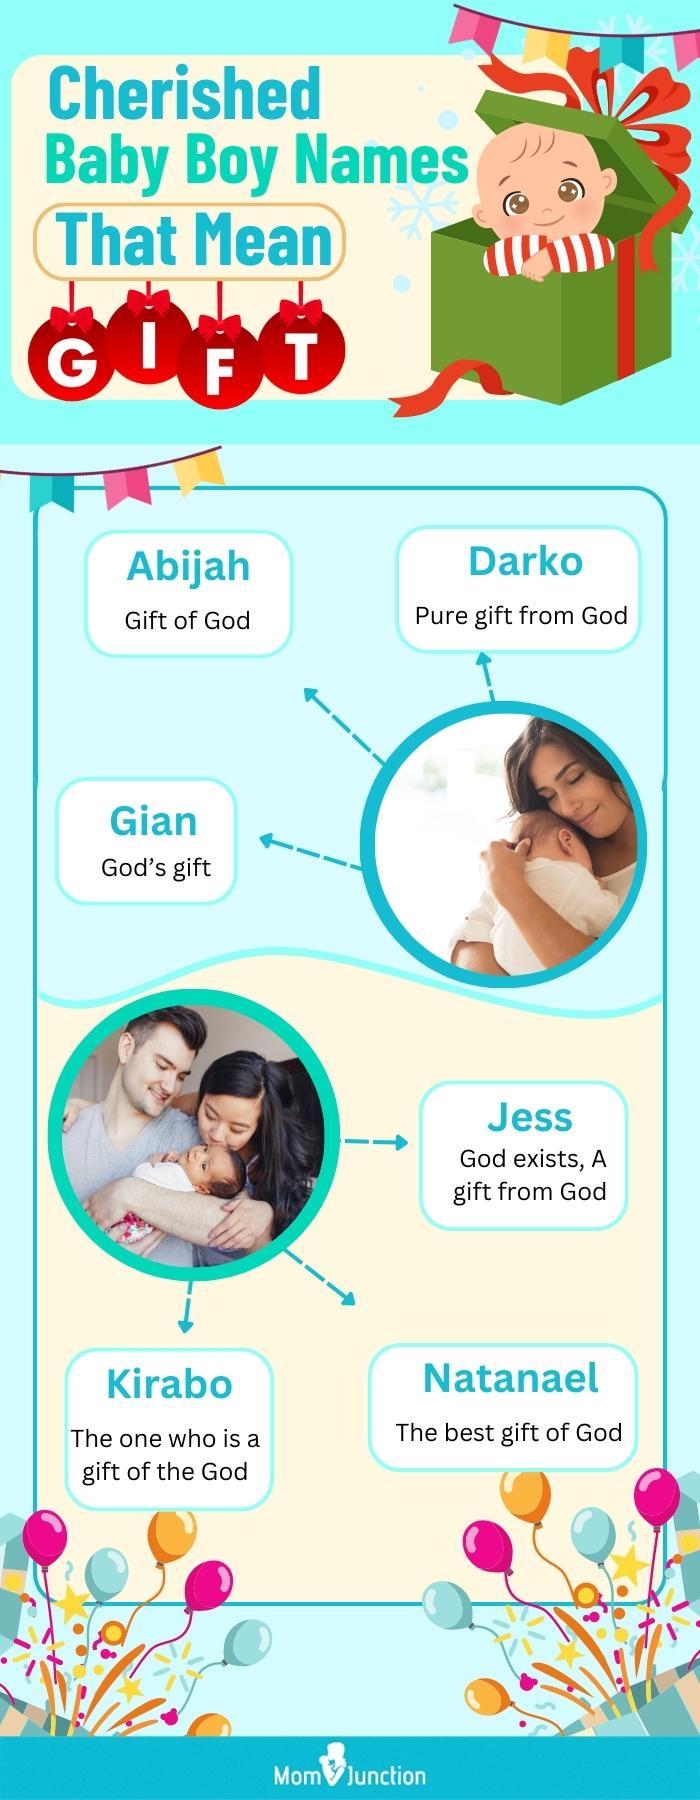 cherished baby boy names that mean gift (infographic)